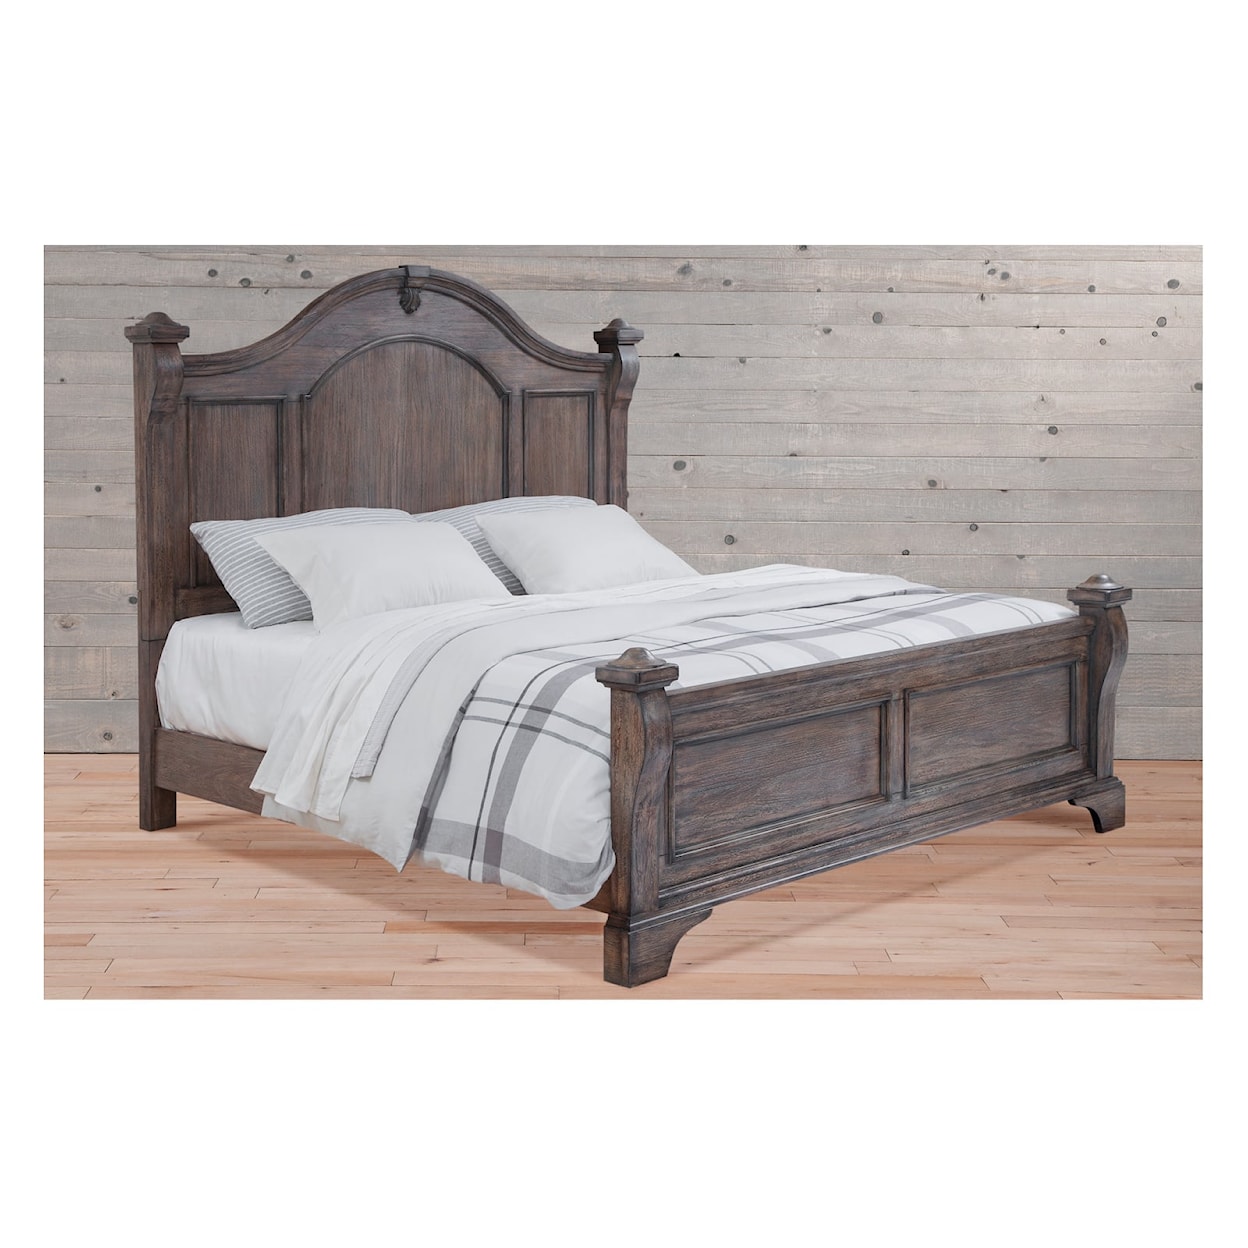 American Woodcrafters Heirloom King Poster Bed